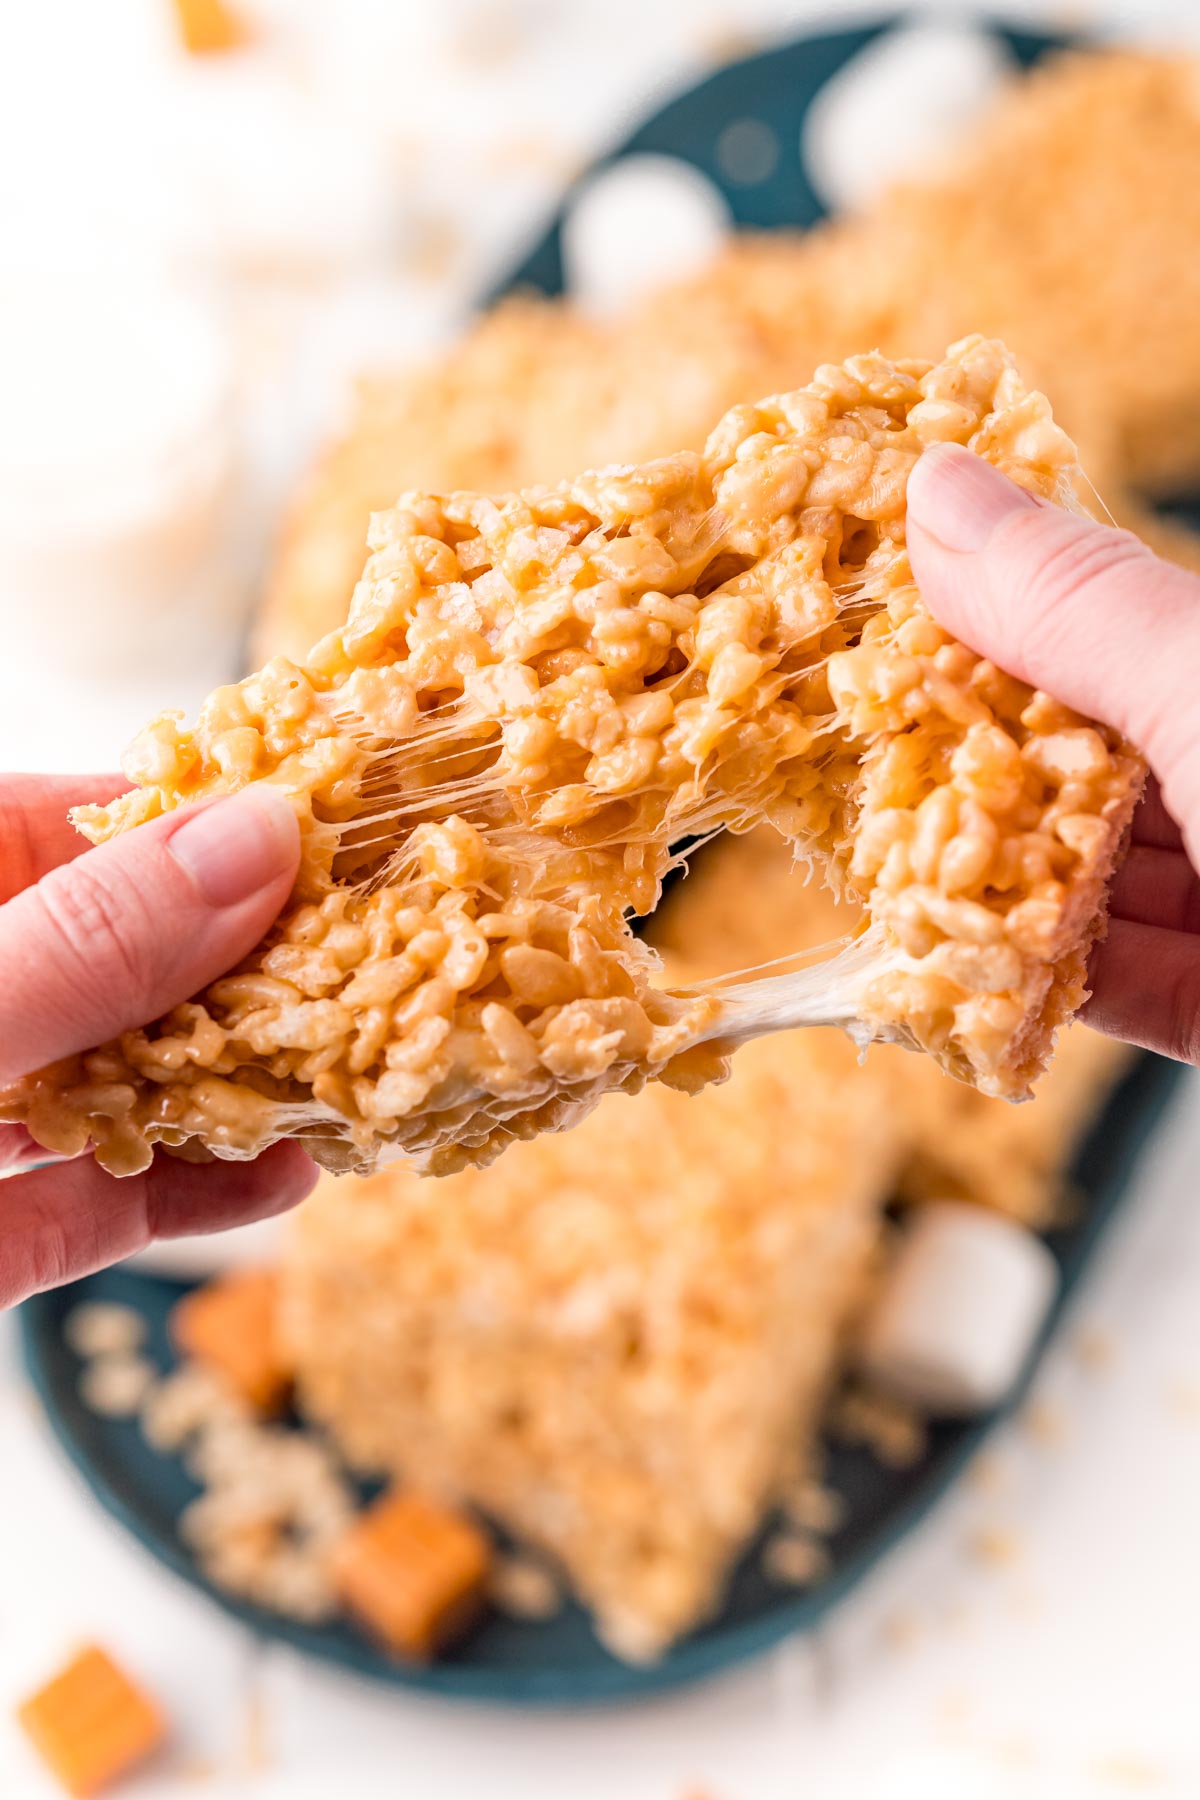 Caramel rice krispie treat being pulled apart by a woman's hands.